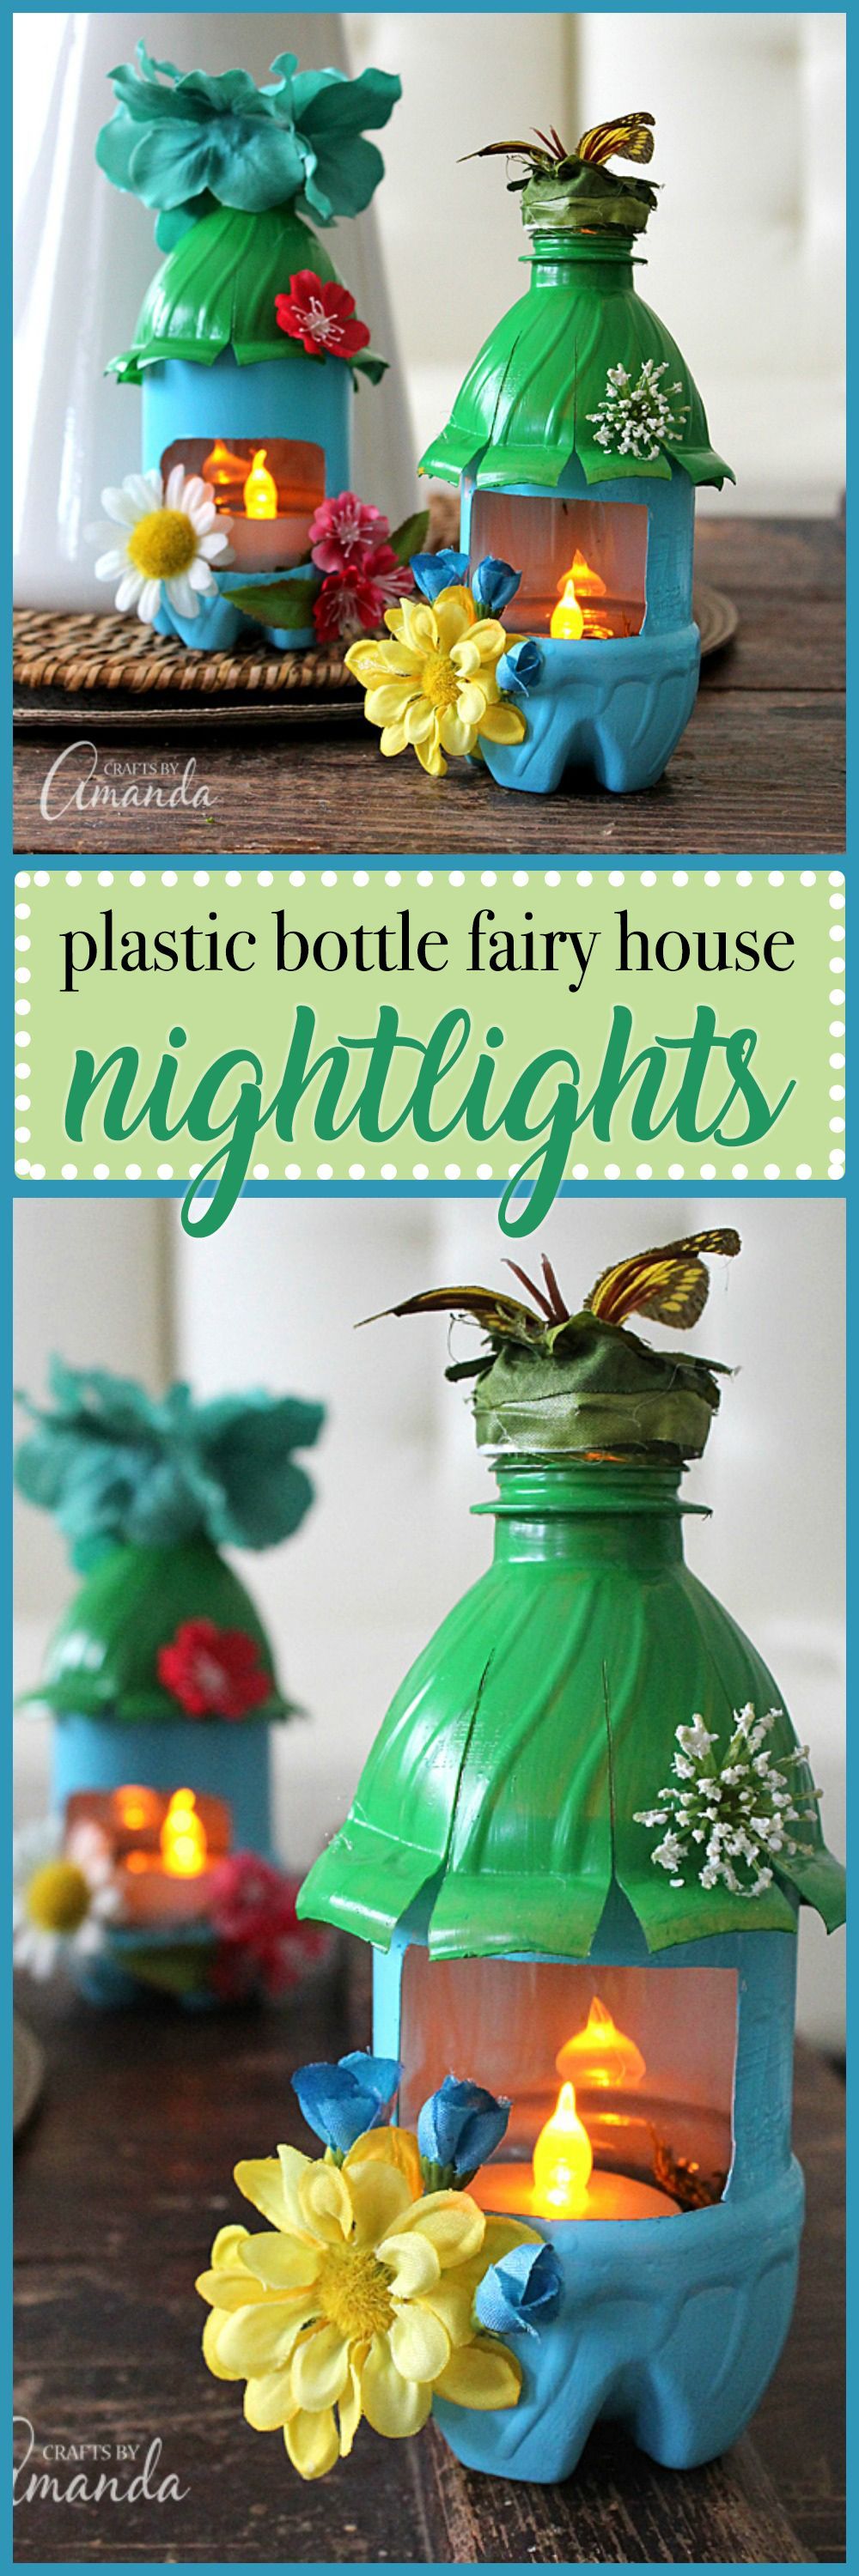 Turn empty plastic water bottles into adorable little fairy house night lights! Fun for a child’s room or a nursery, or even the